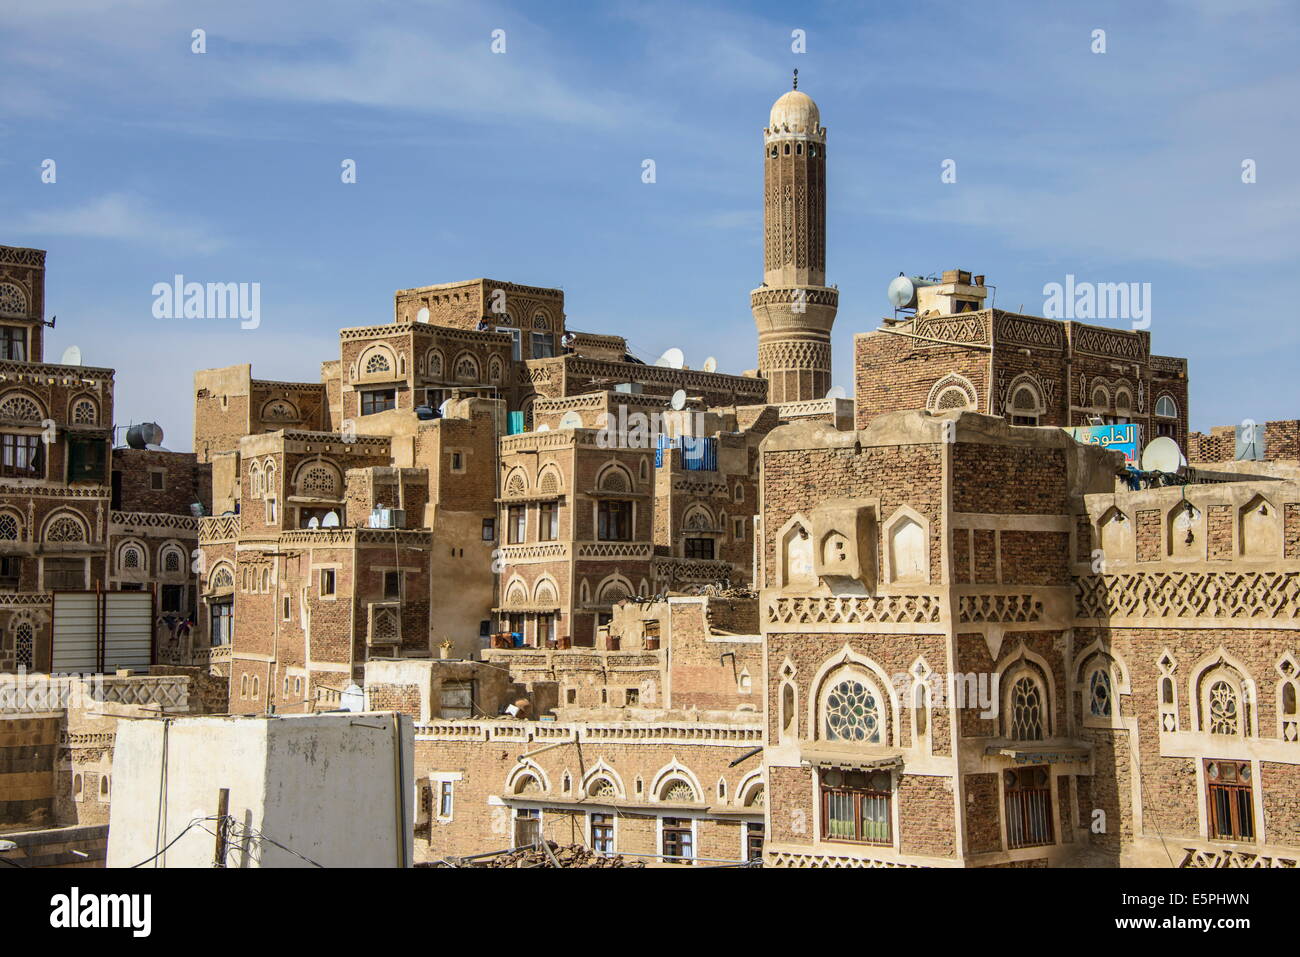 Traditional build old houses in the Old Town, UNESCO World Heritage Site, Sanaa, Yemen, Middle East Stock Photo